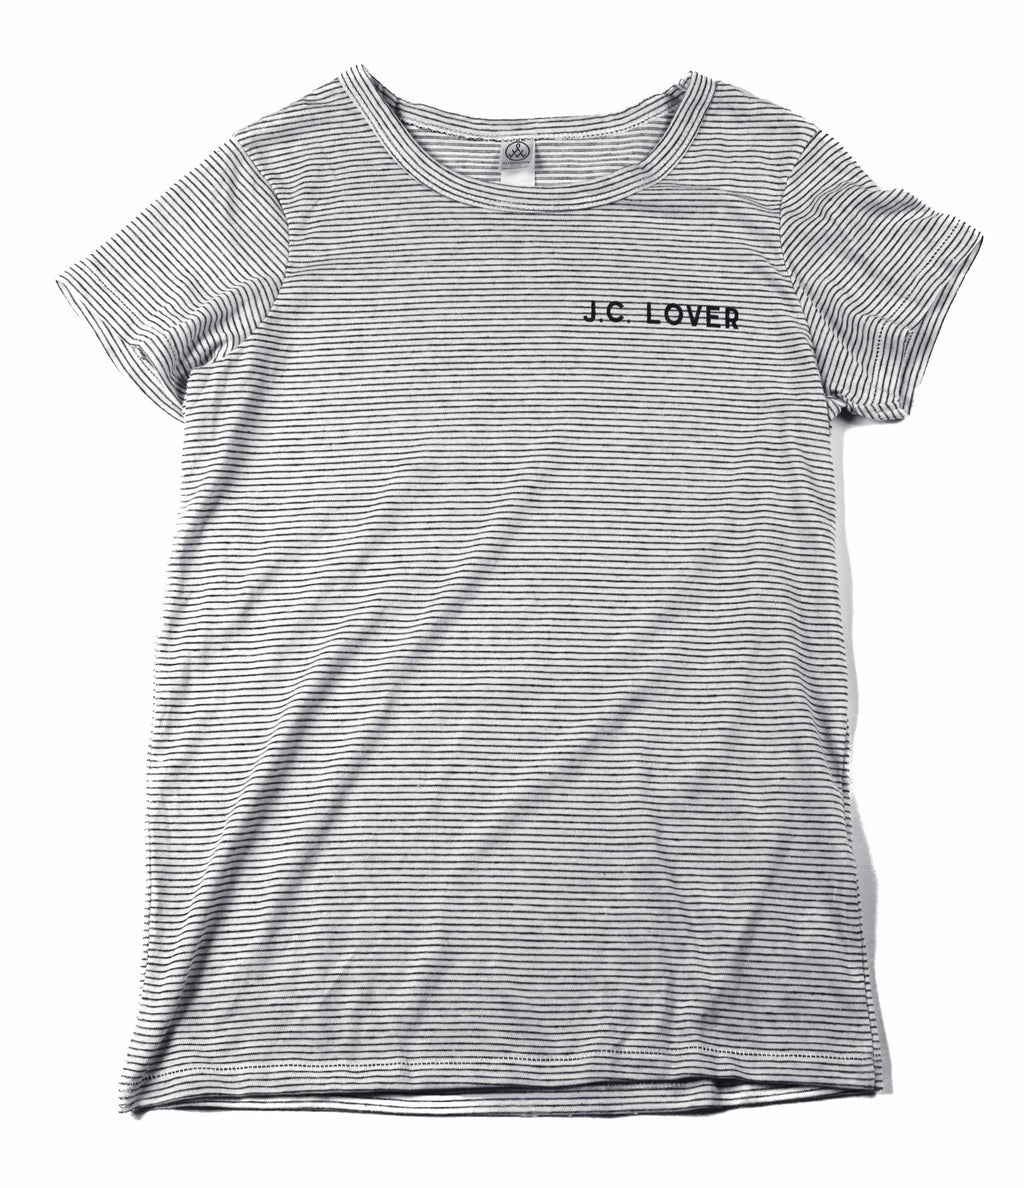 J.C. LOVER STRIPED WOMAN'S FITTED T-SHIRT